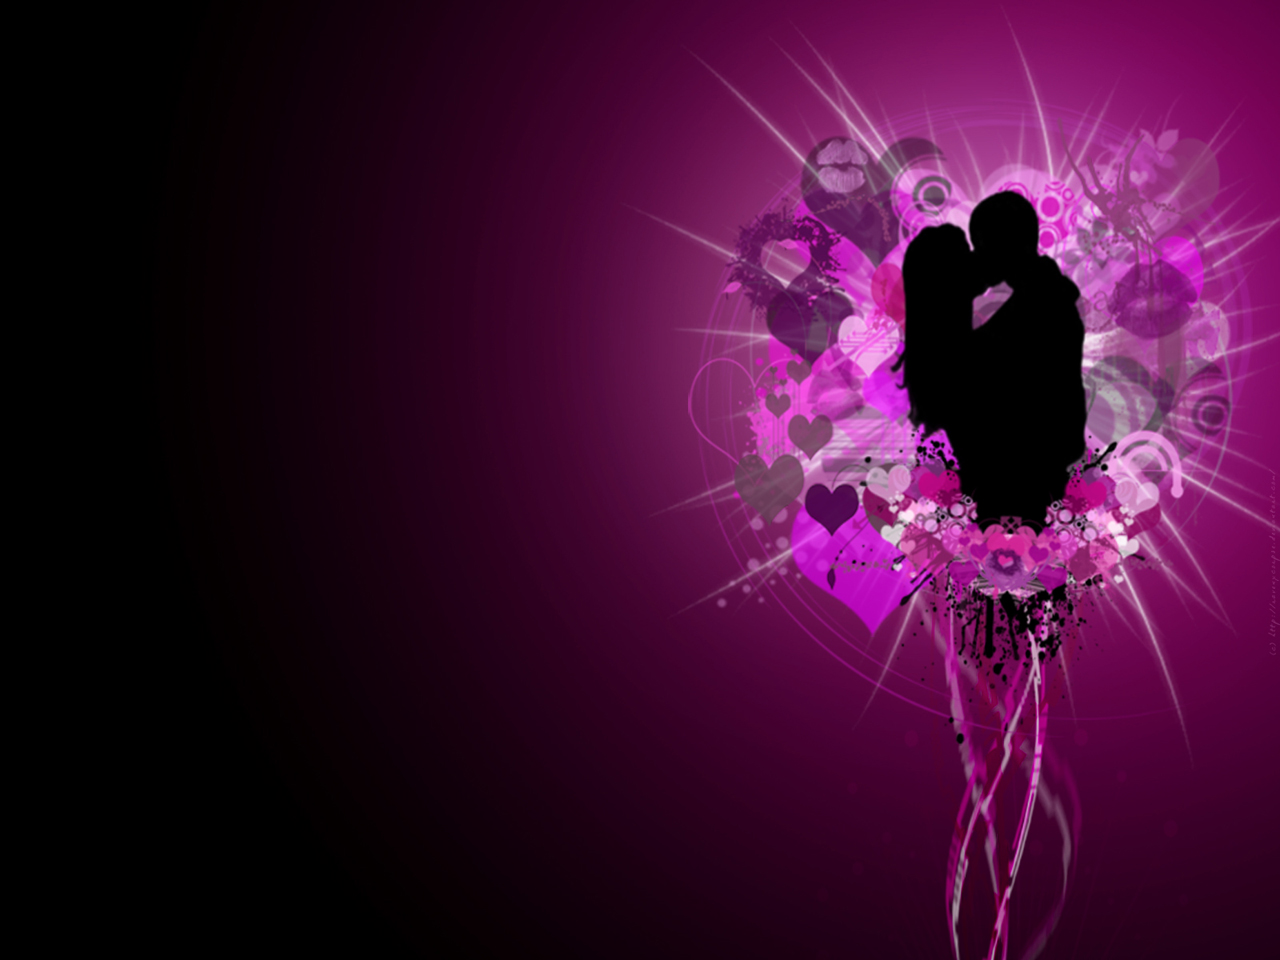 Desktop Wallpaper It S All About Love Romance And Heart